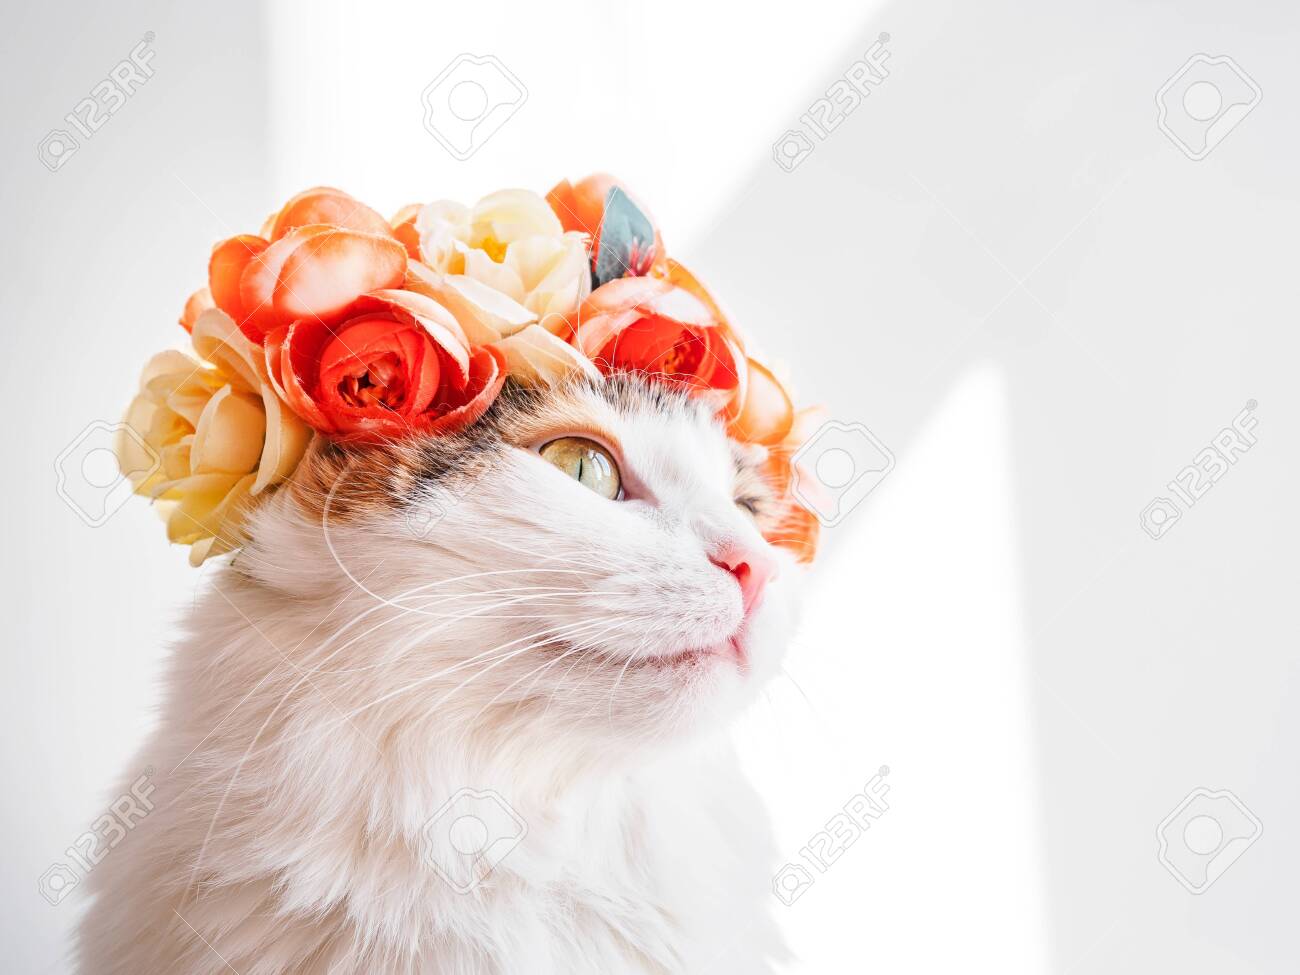 121632641-beautiful-calico-cat-with-a-wreath-on-his-head-cute-kitty-in-a-flowers-diadem-on-her-head-sits-in-th.jpg